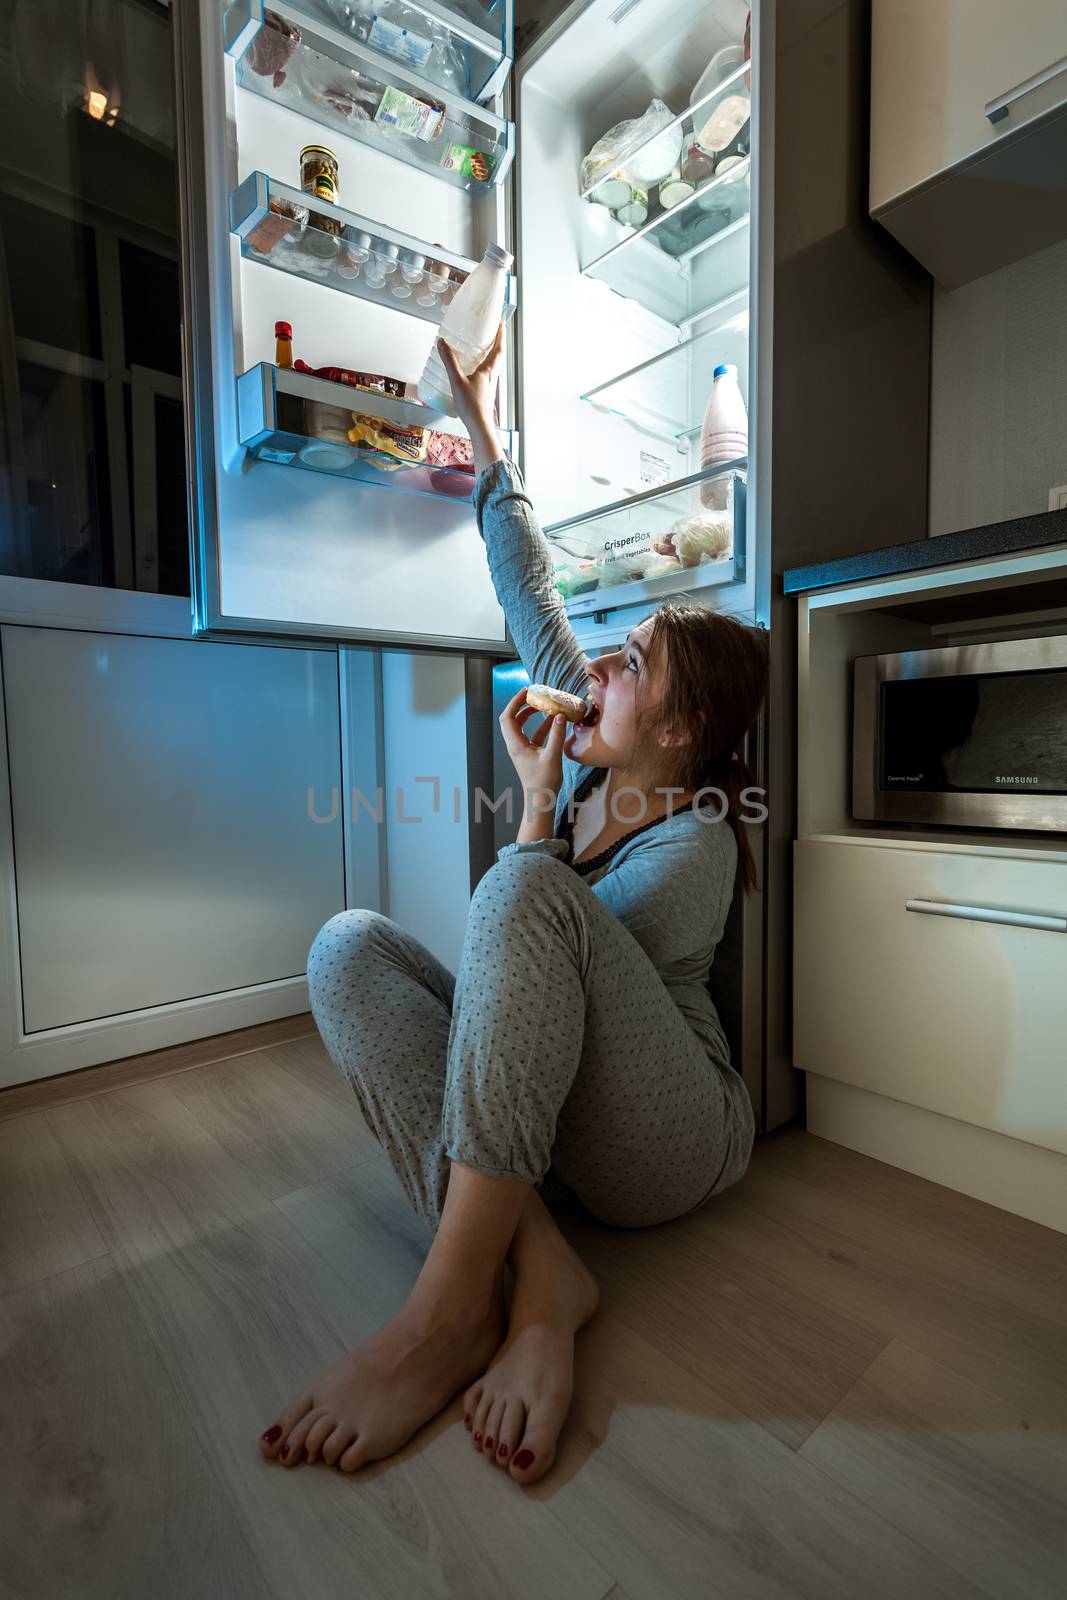 Woman eating on floor and reaching milk from fridge by Kryzhov